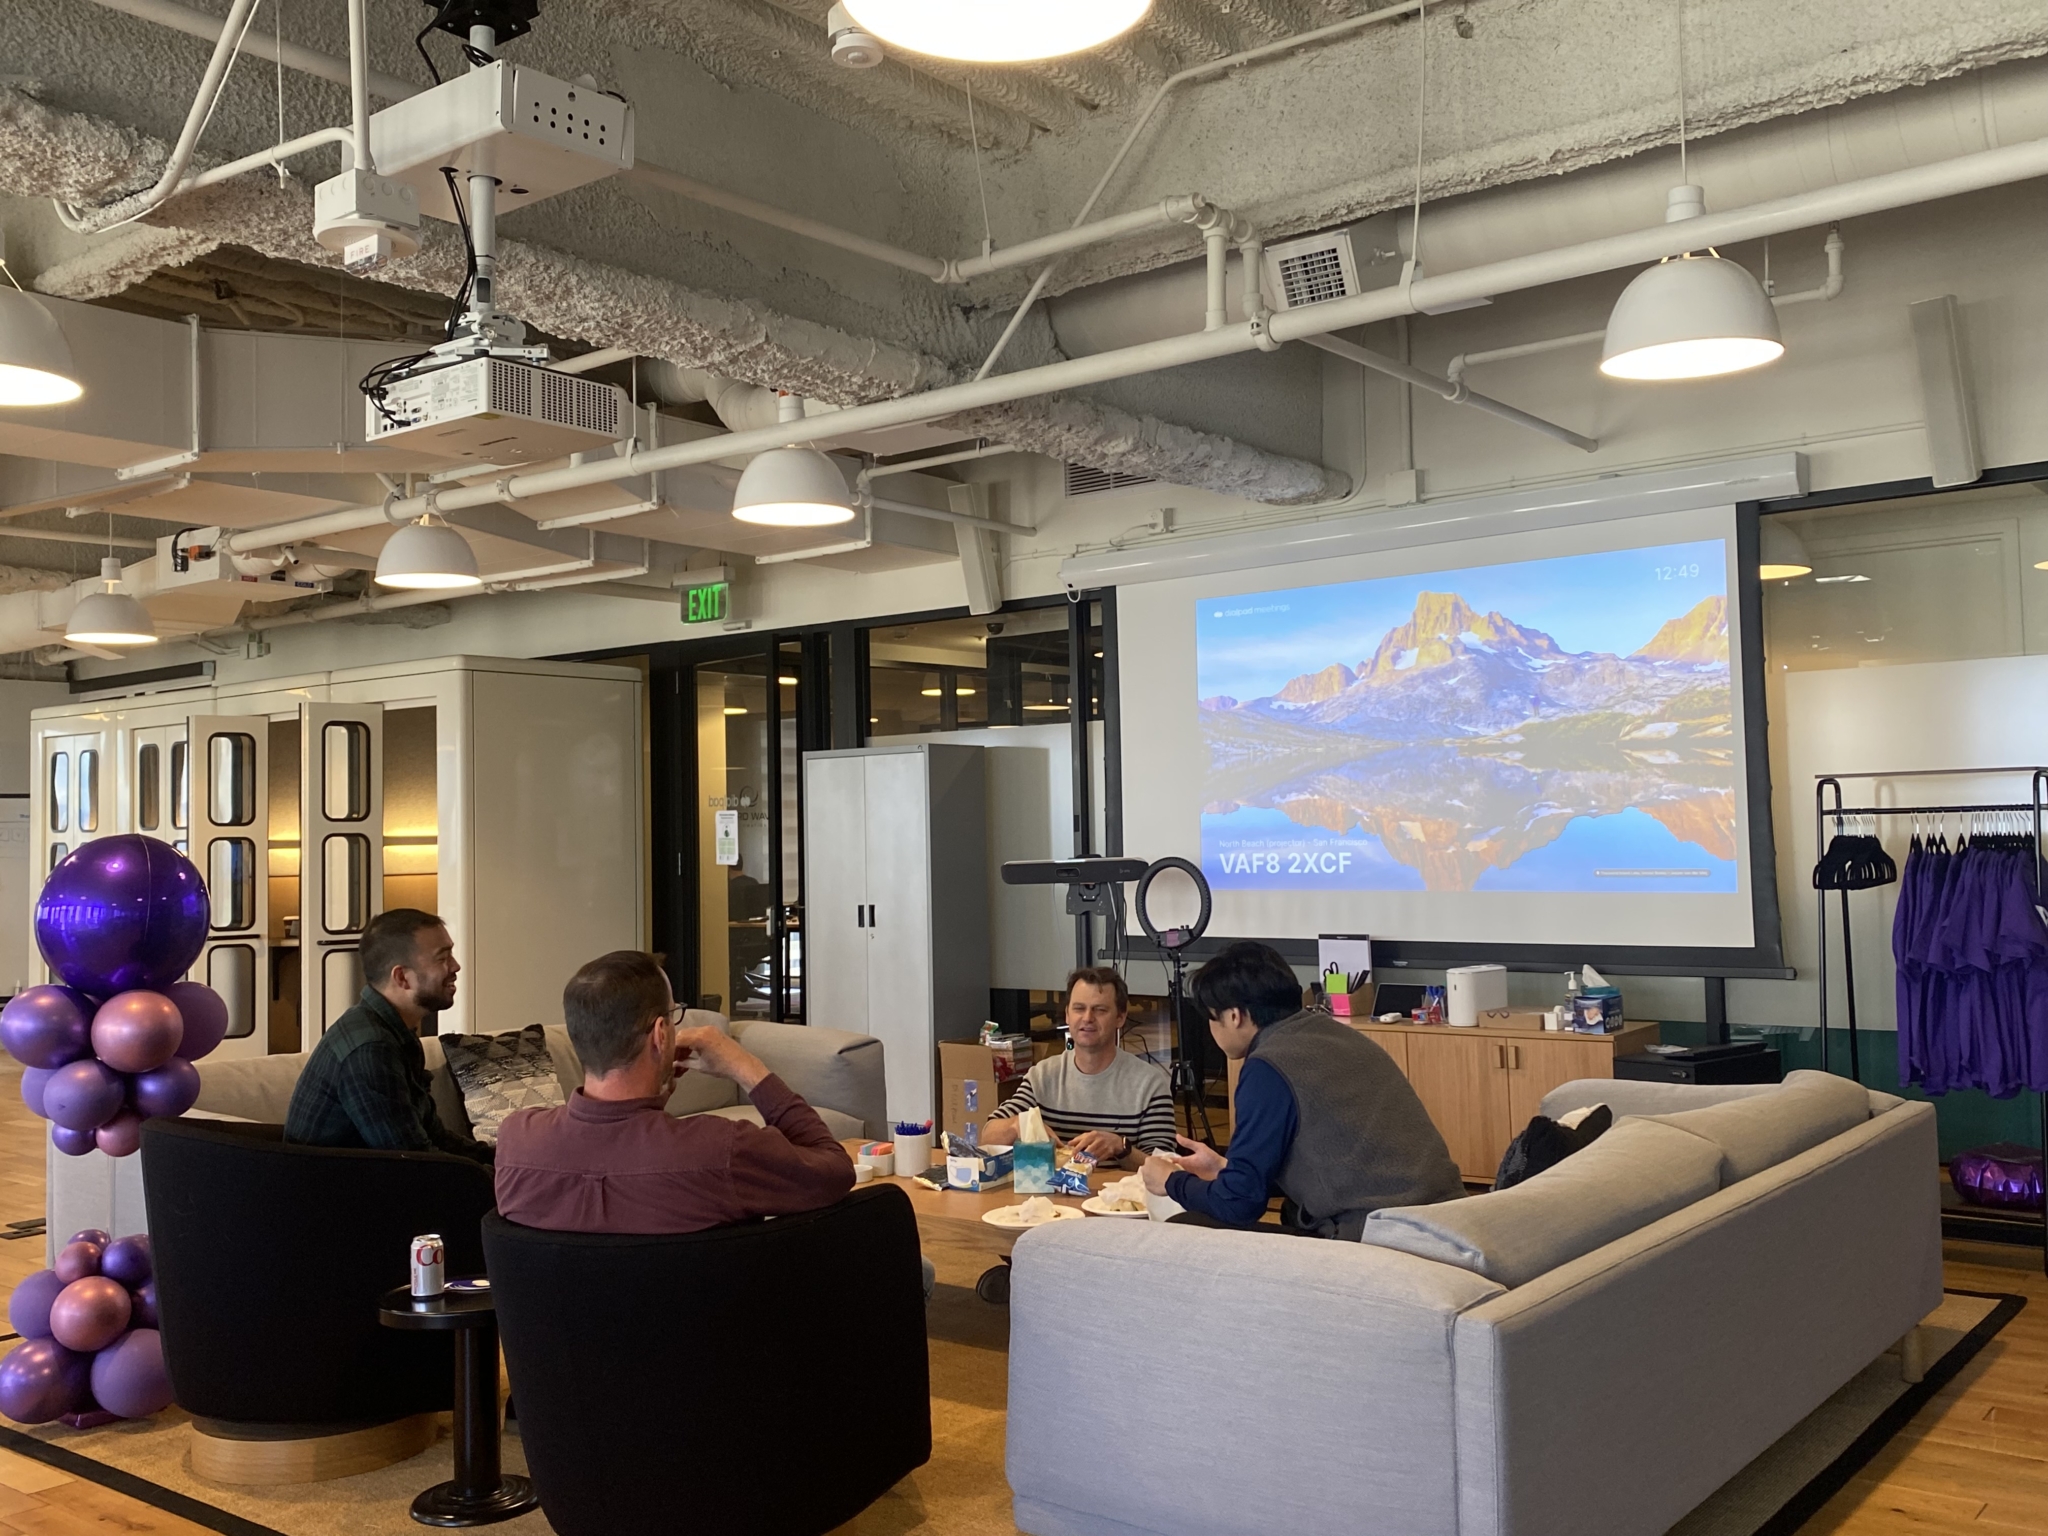 Dialpad employees at the WeWork office in San Francisco sit around a large coffee table in a lounge space.